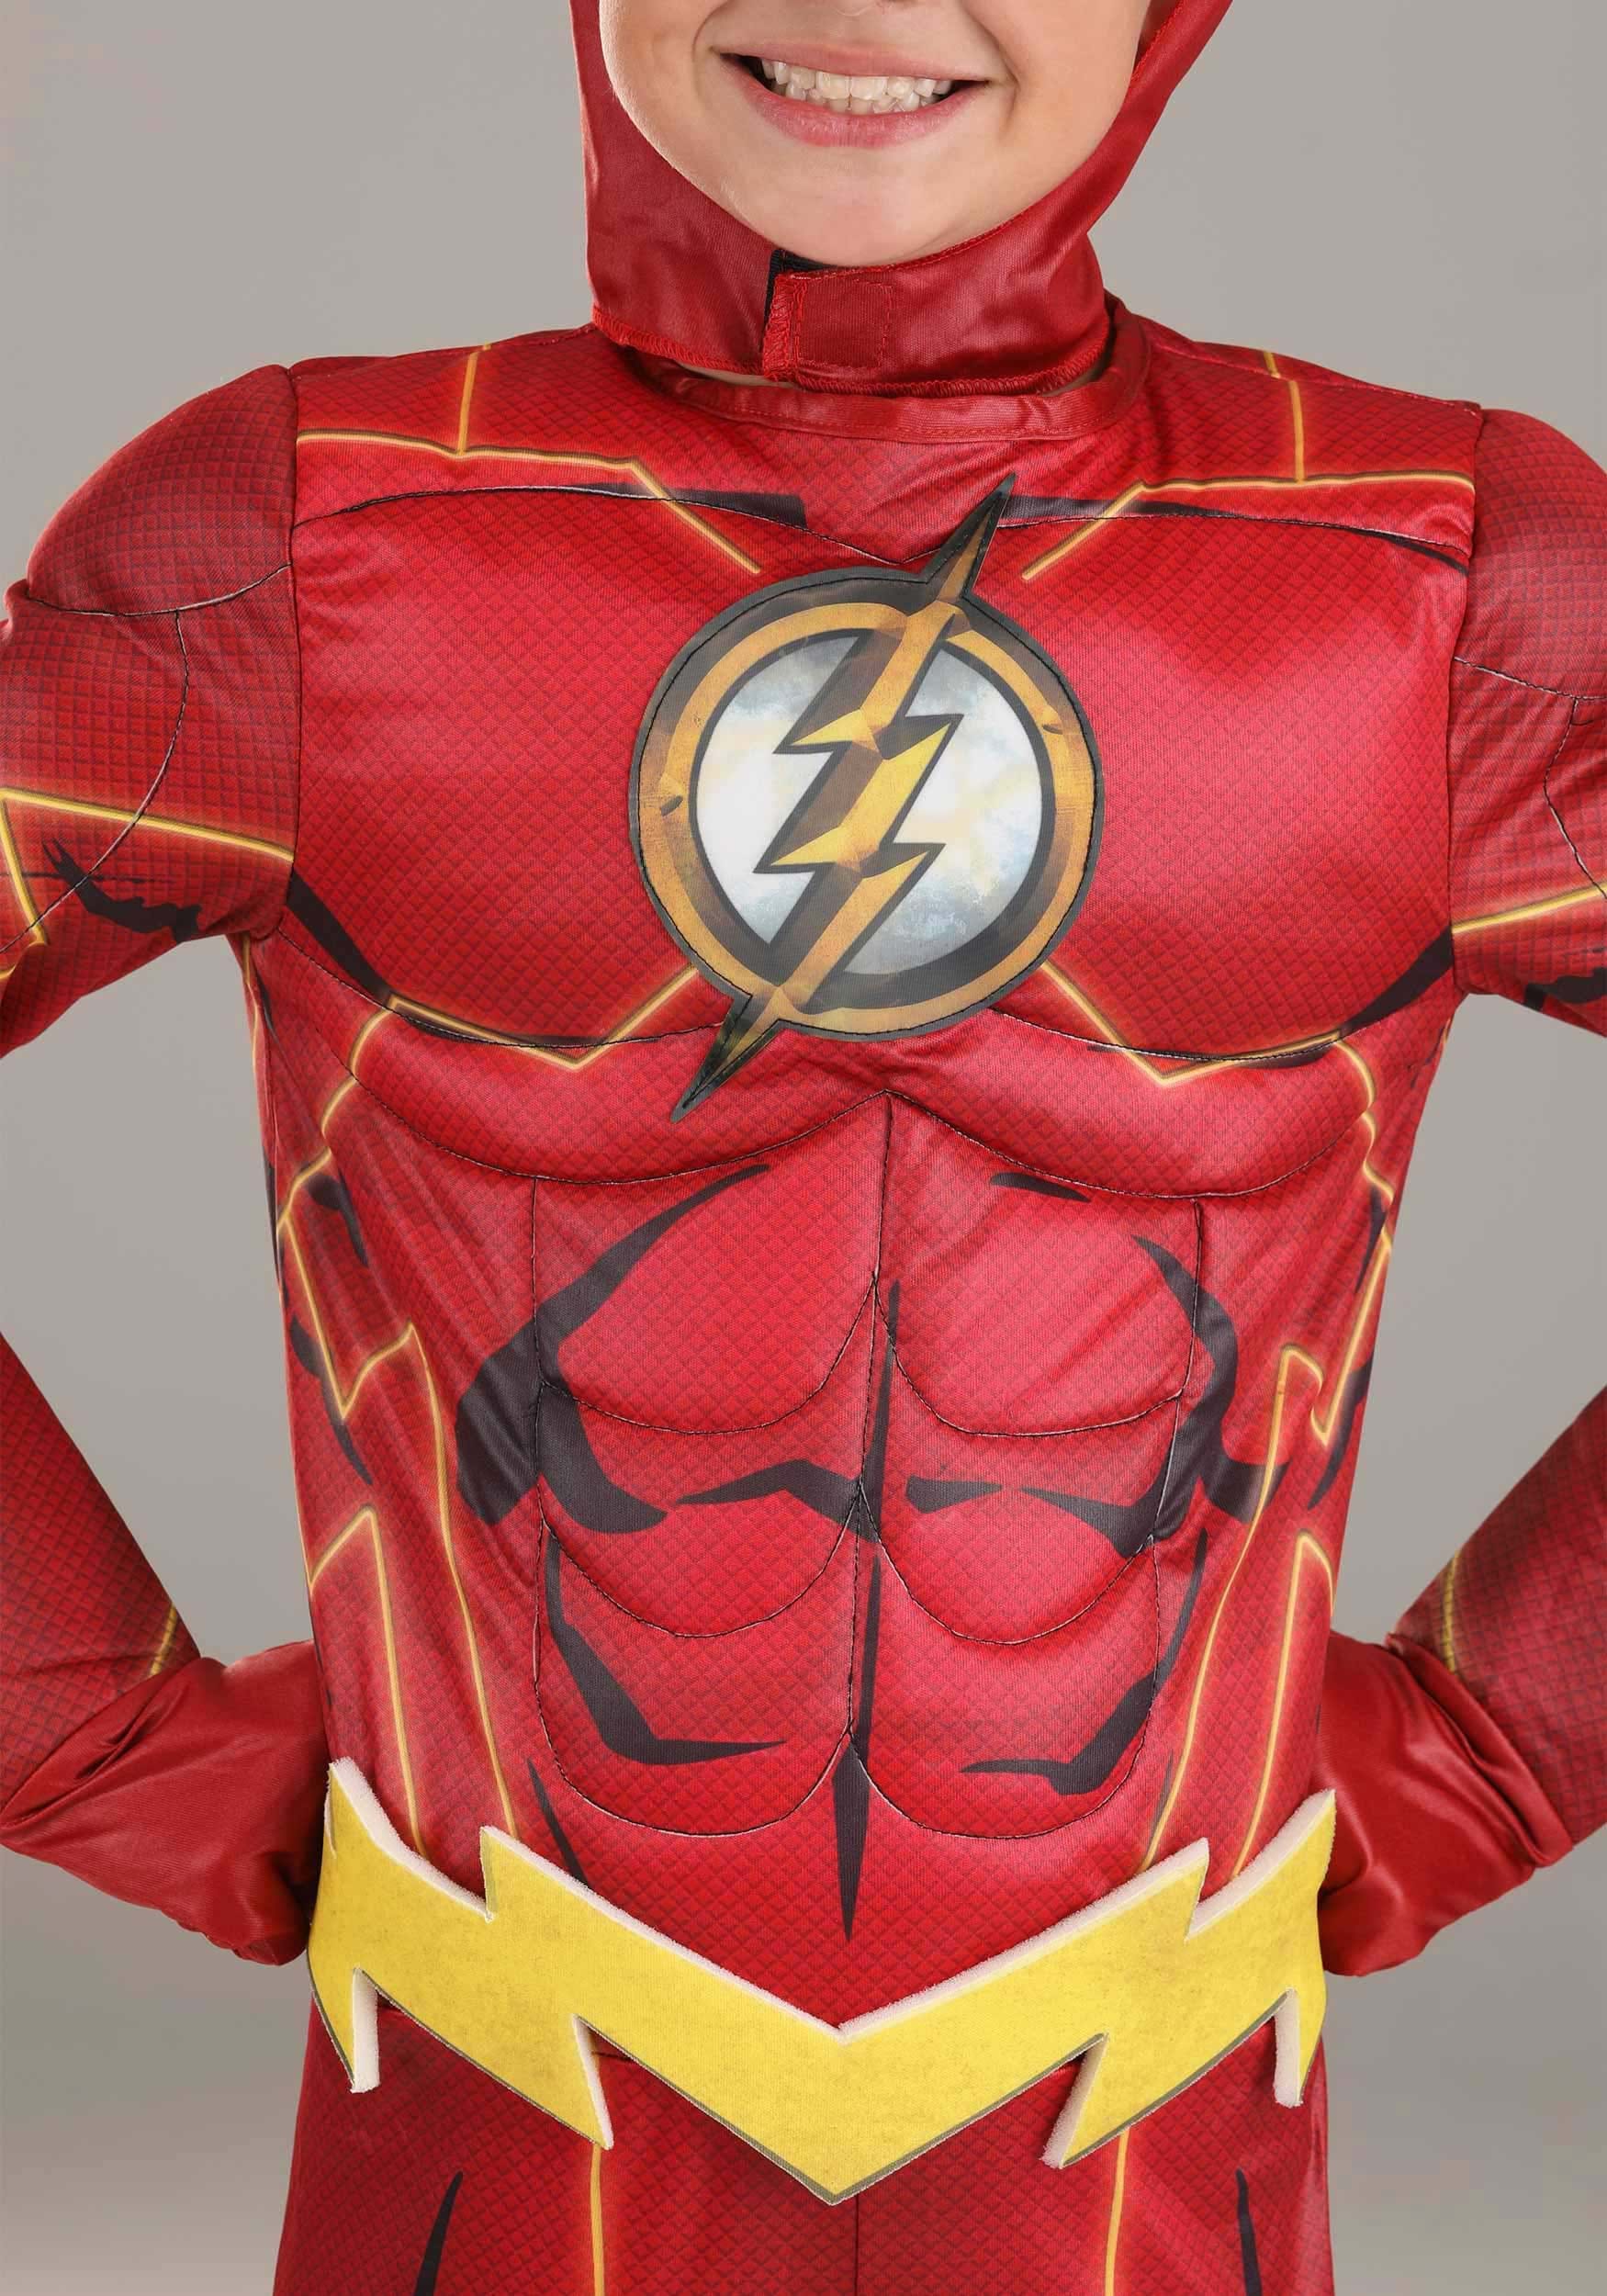 DC Comics Deluxe Muscle Chest The Flash Boys Child Costume Size Small 